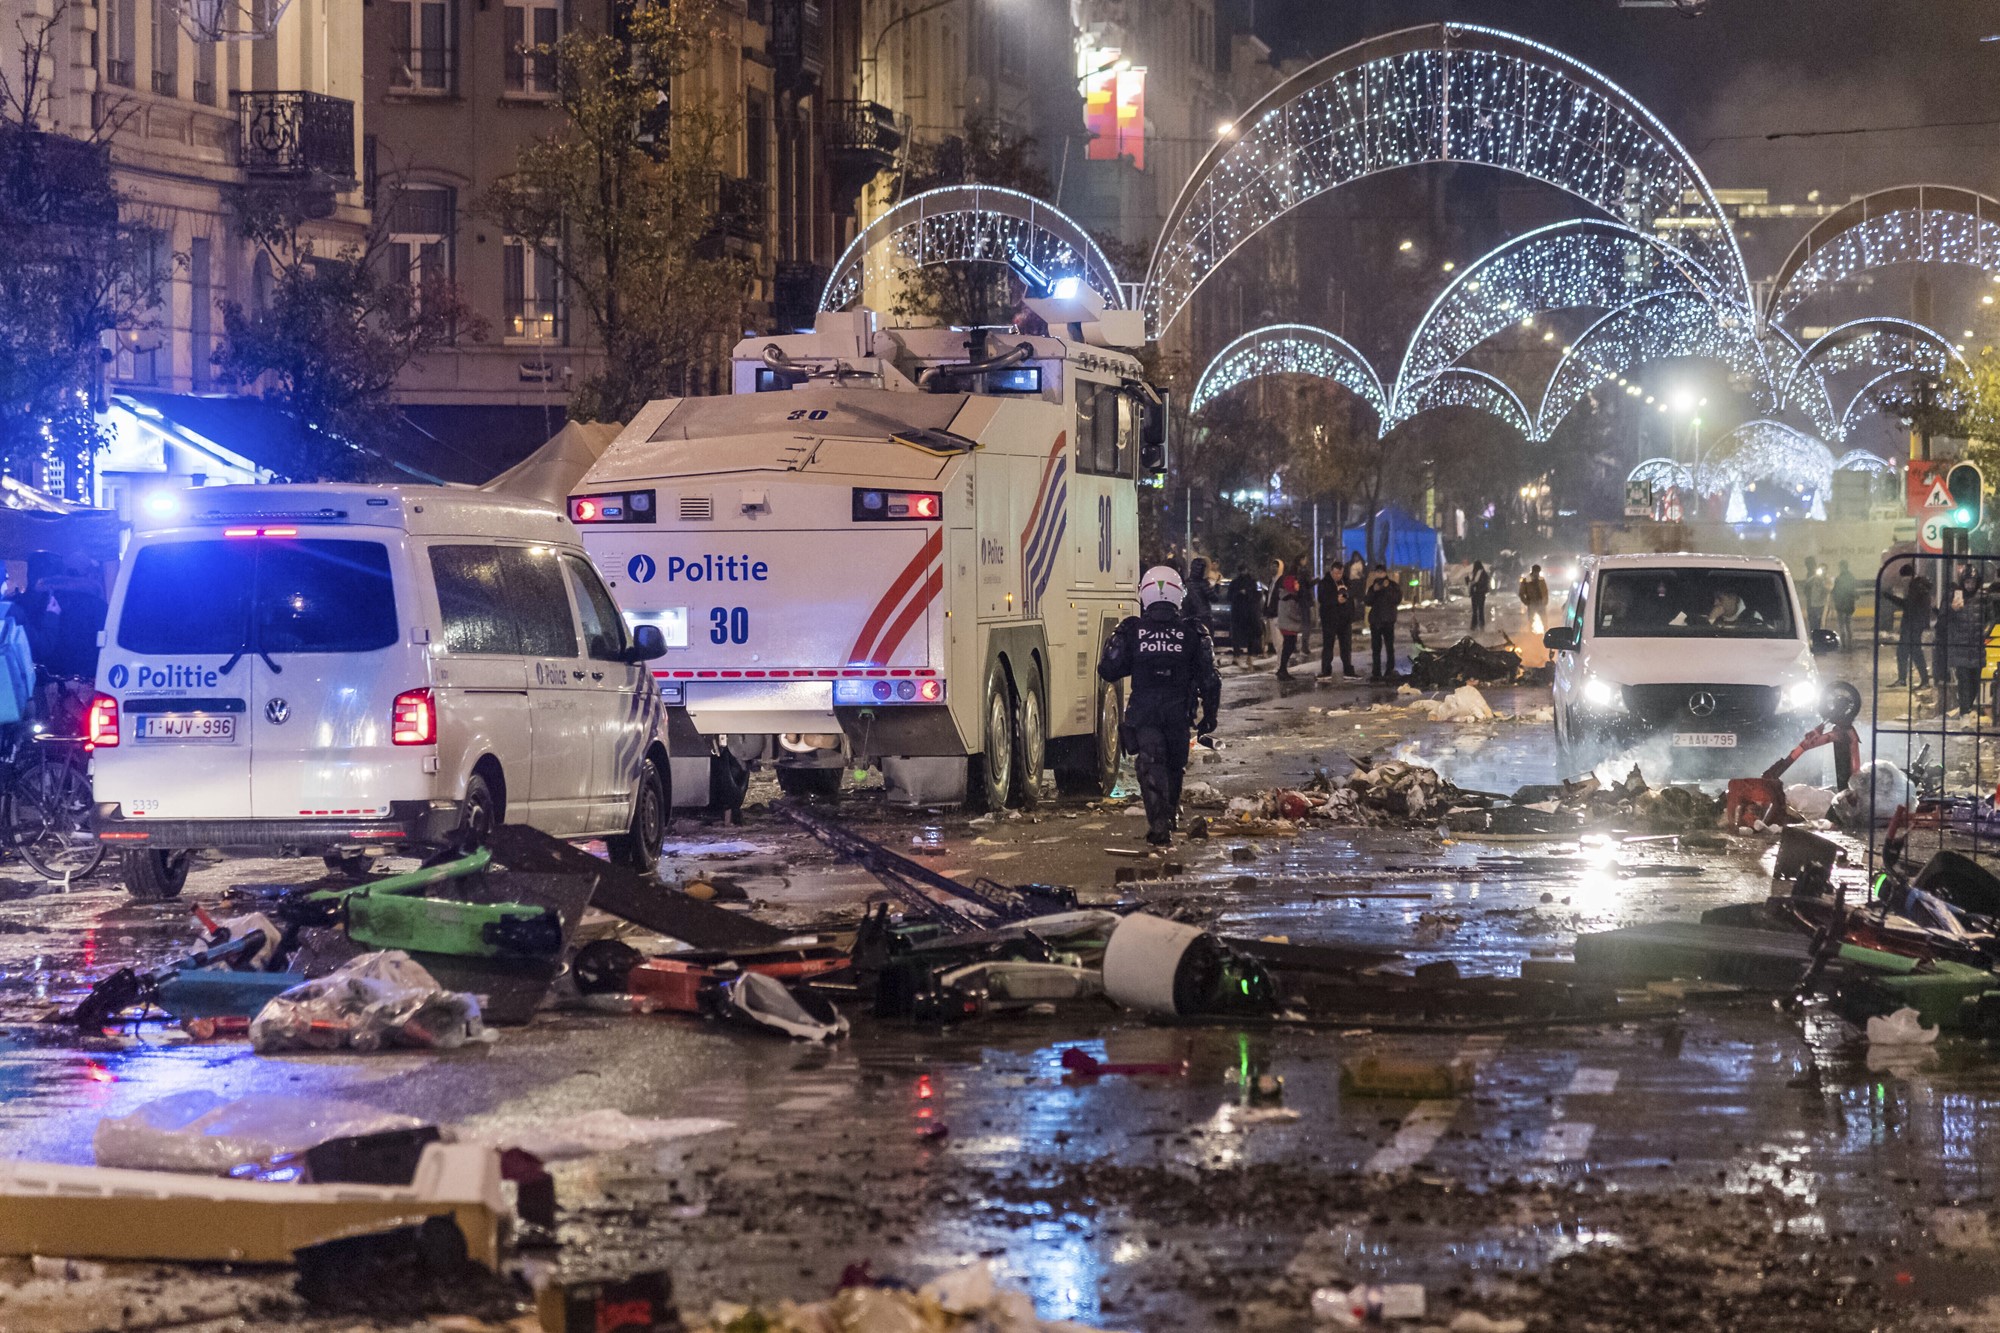 Police cars drive through a main boulevard in Brussels amid debris. 